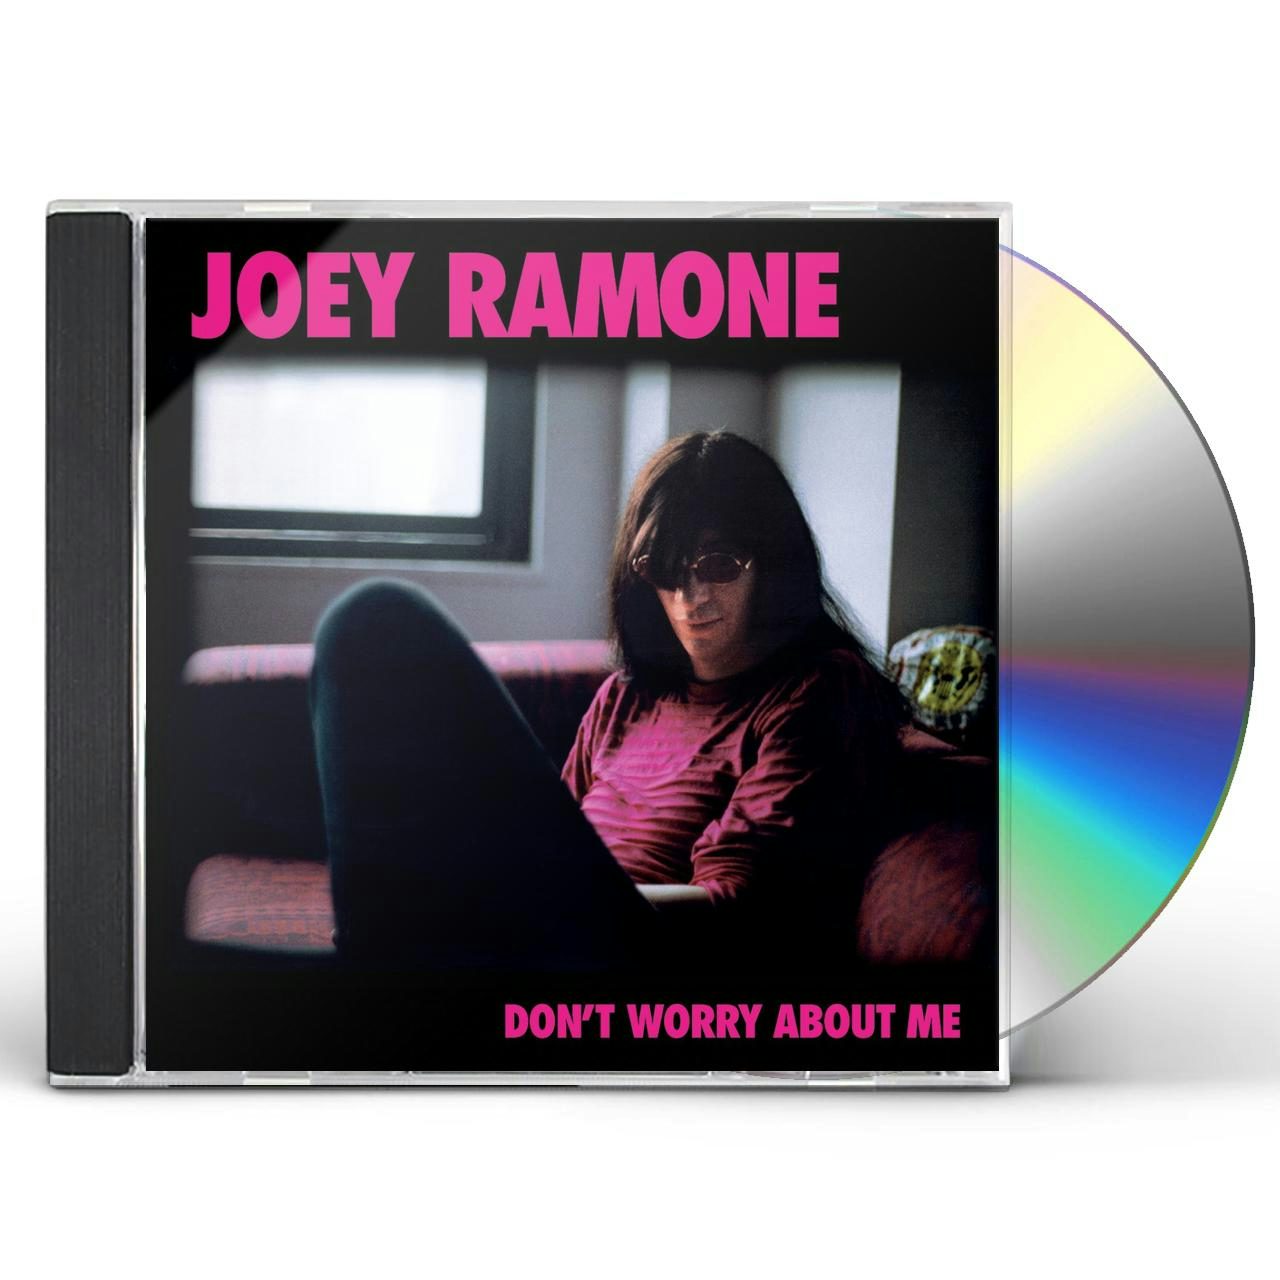 Joey Ramone Don't Worry About Me Vinyl Record $22.99$19.99